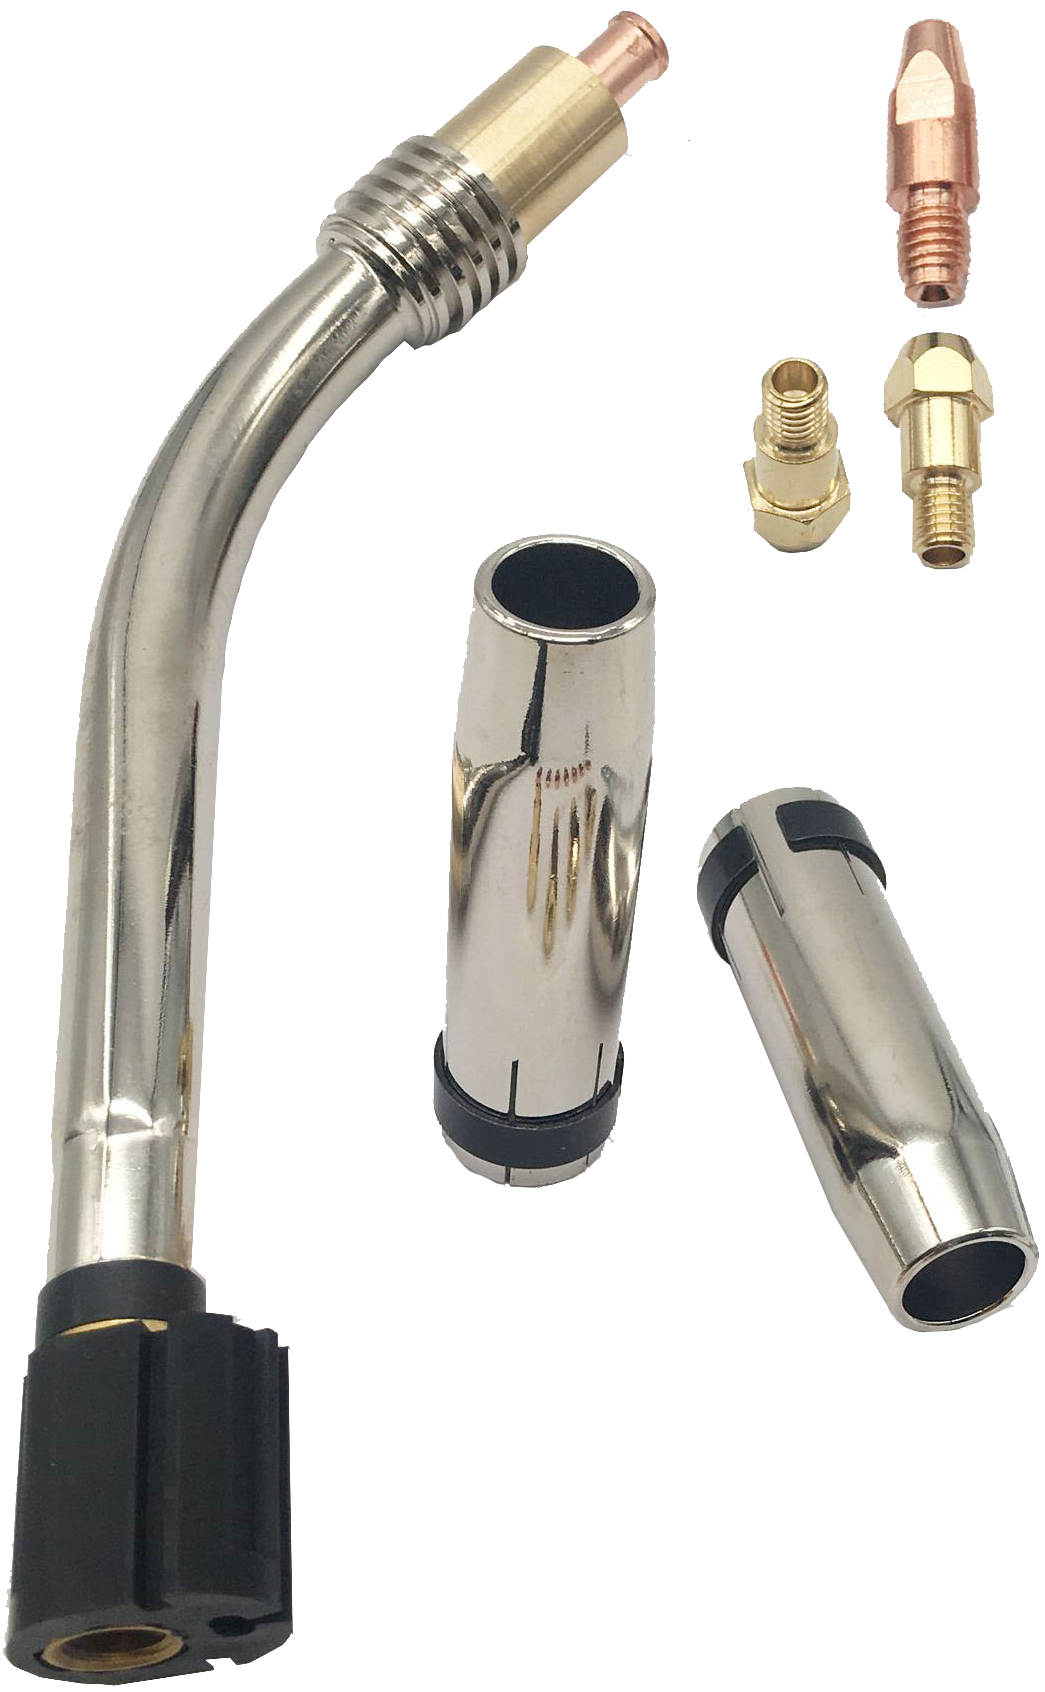 MB36 Torch parts, including shrouds and shroud springs, tip adaptor, complete neck, diffusers & tips